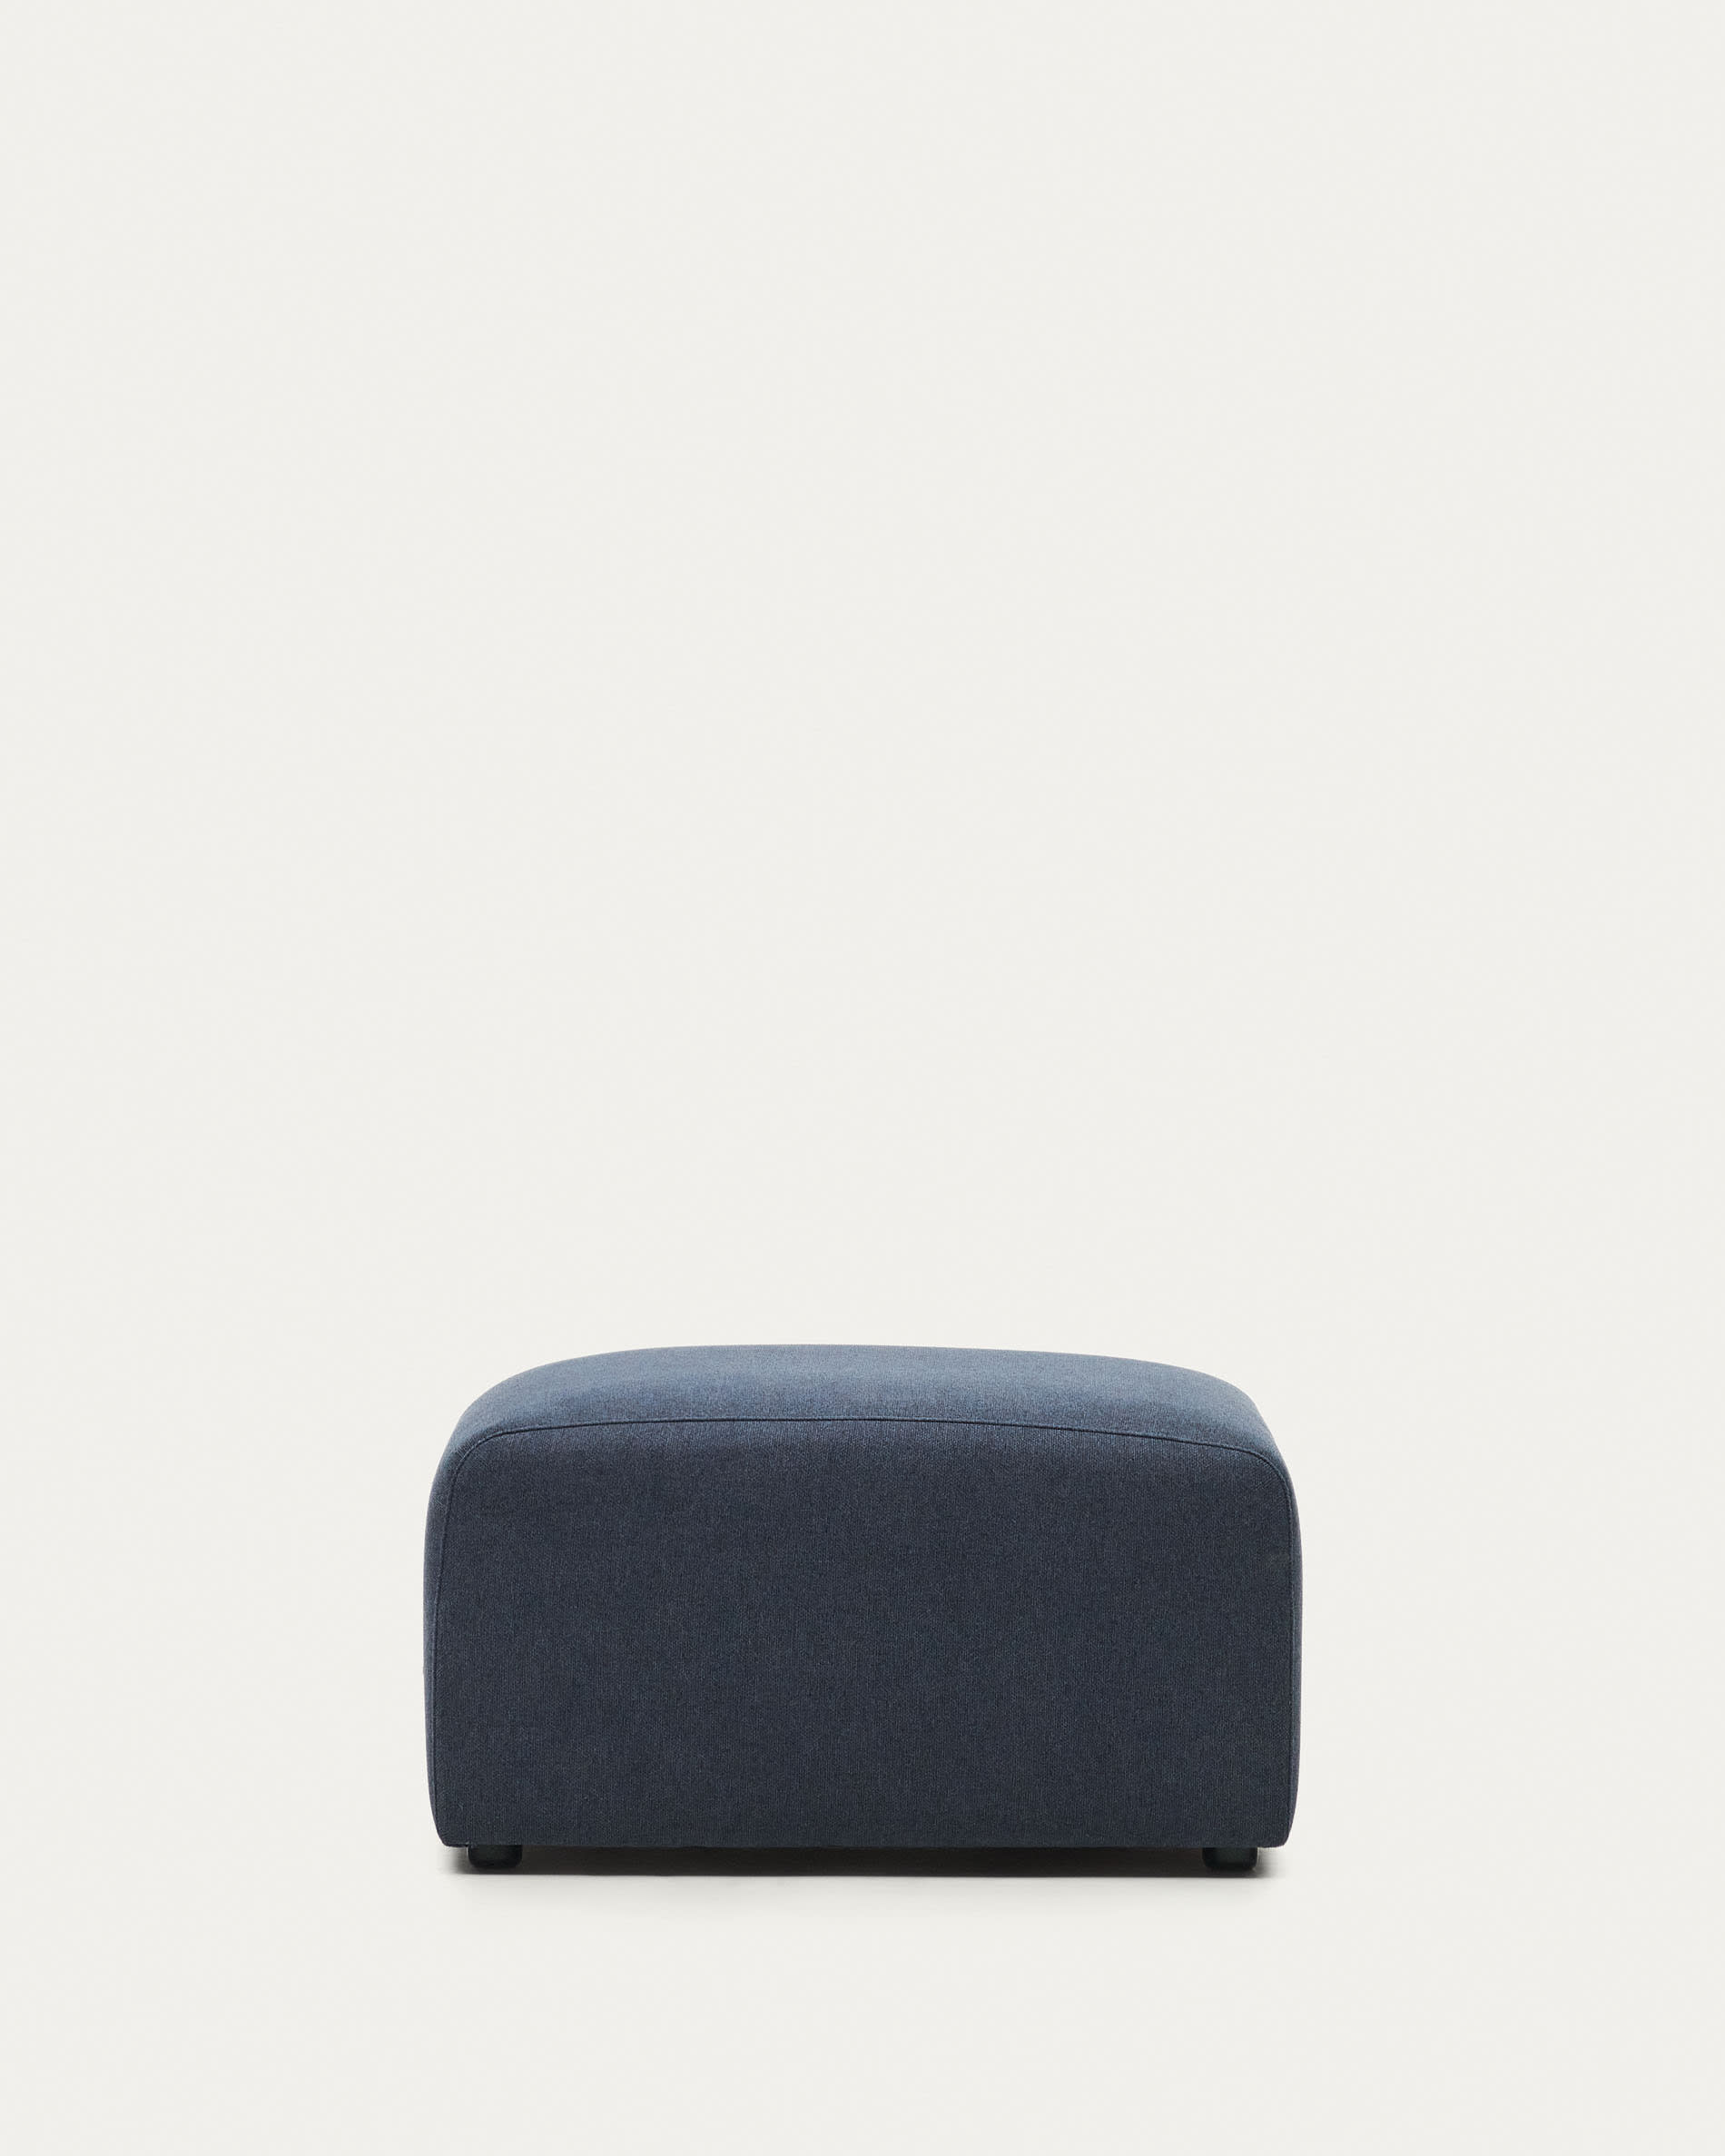 Neom footrest in blue, 75 x 64 cm